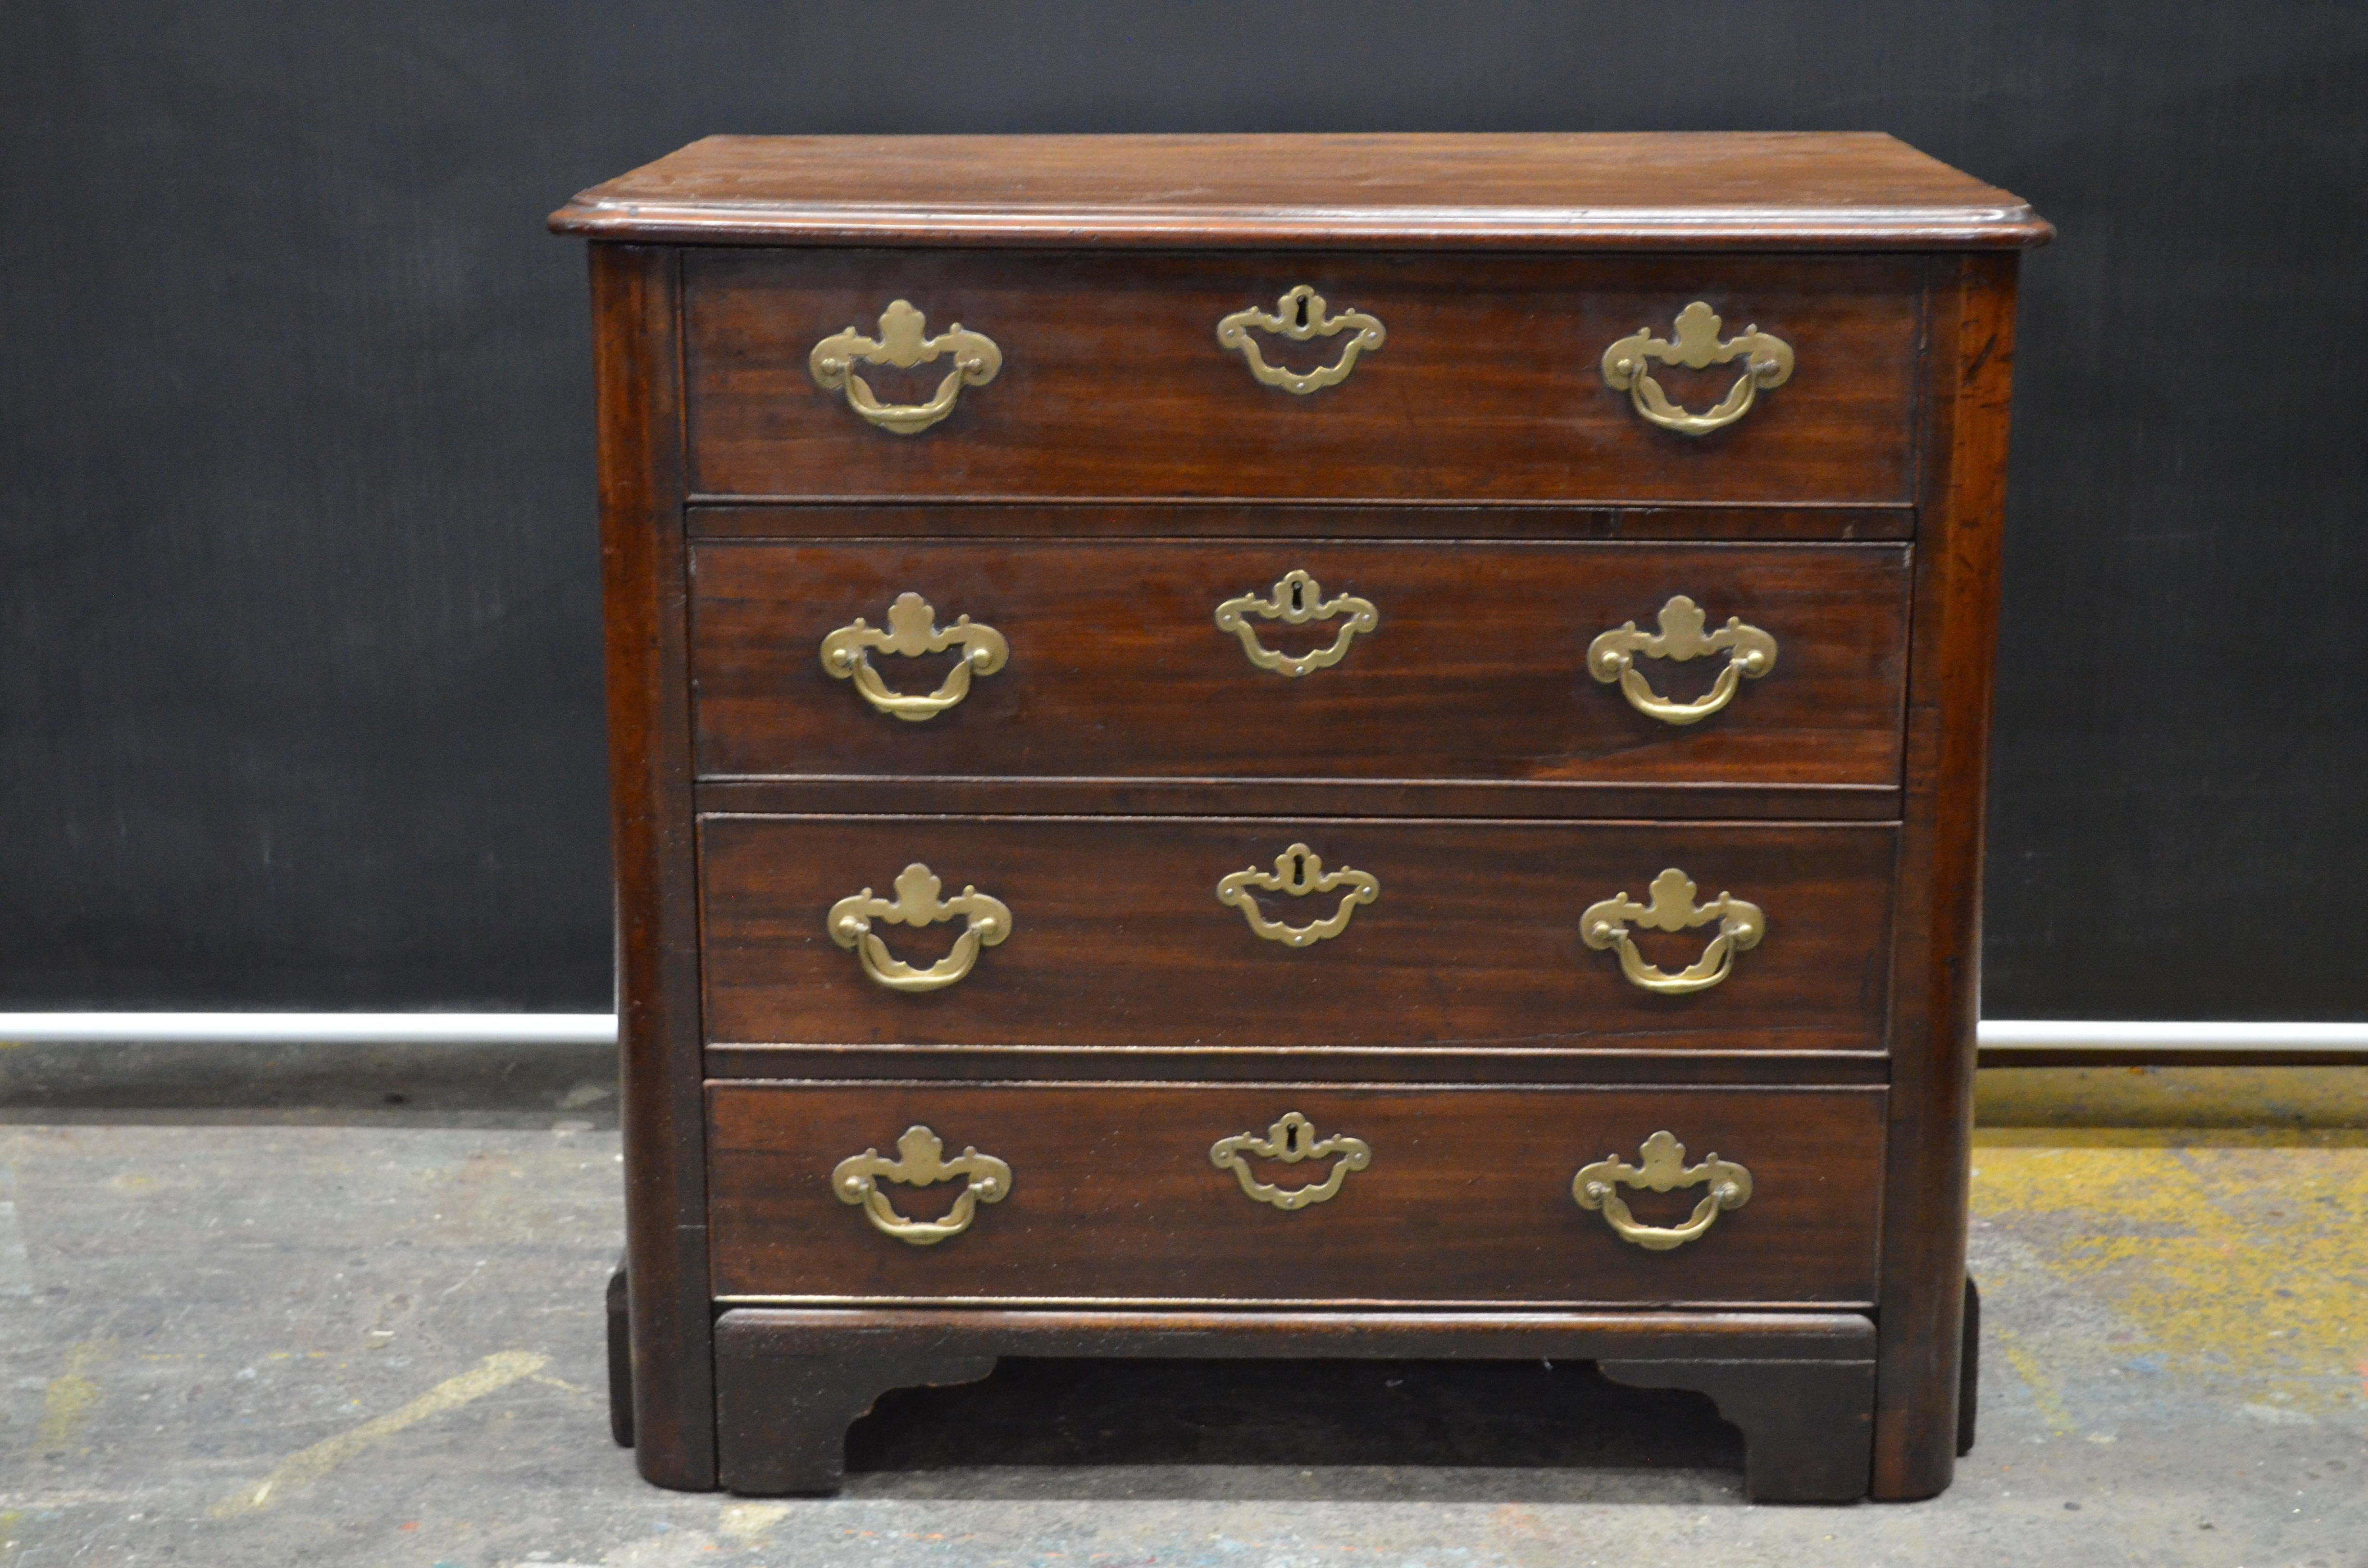 An extraordinarily rare English Queen Ann Walnut metamorphic chest of drawers with pull out writing desk made in the early 18th century. This remarkable George I period queen Ann chest has full dust slides under the four drawers that still retain